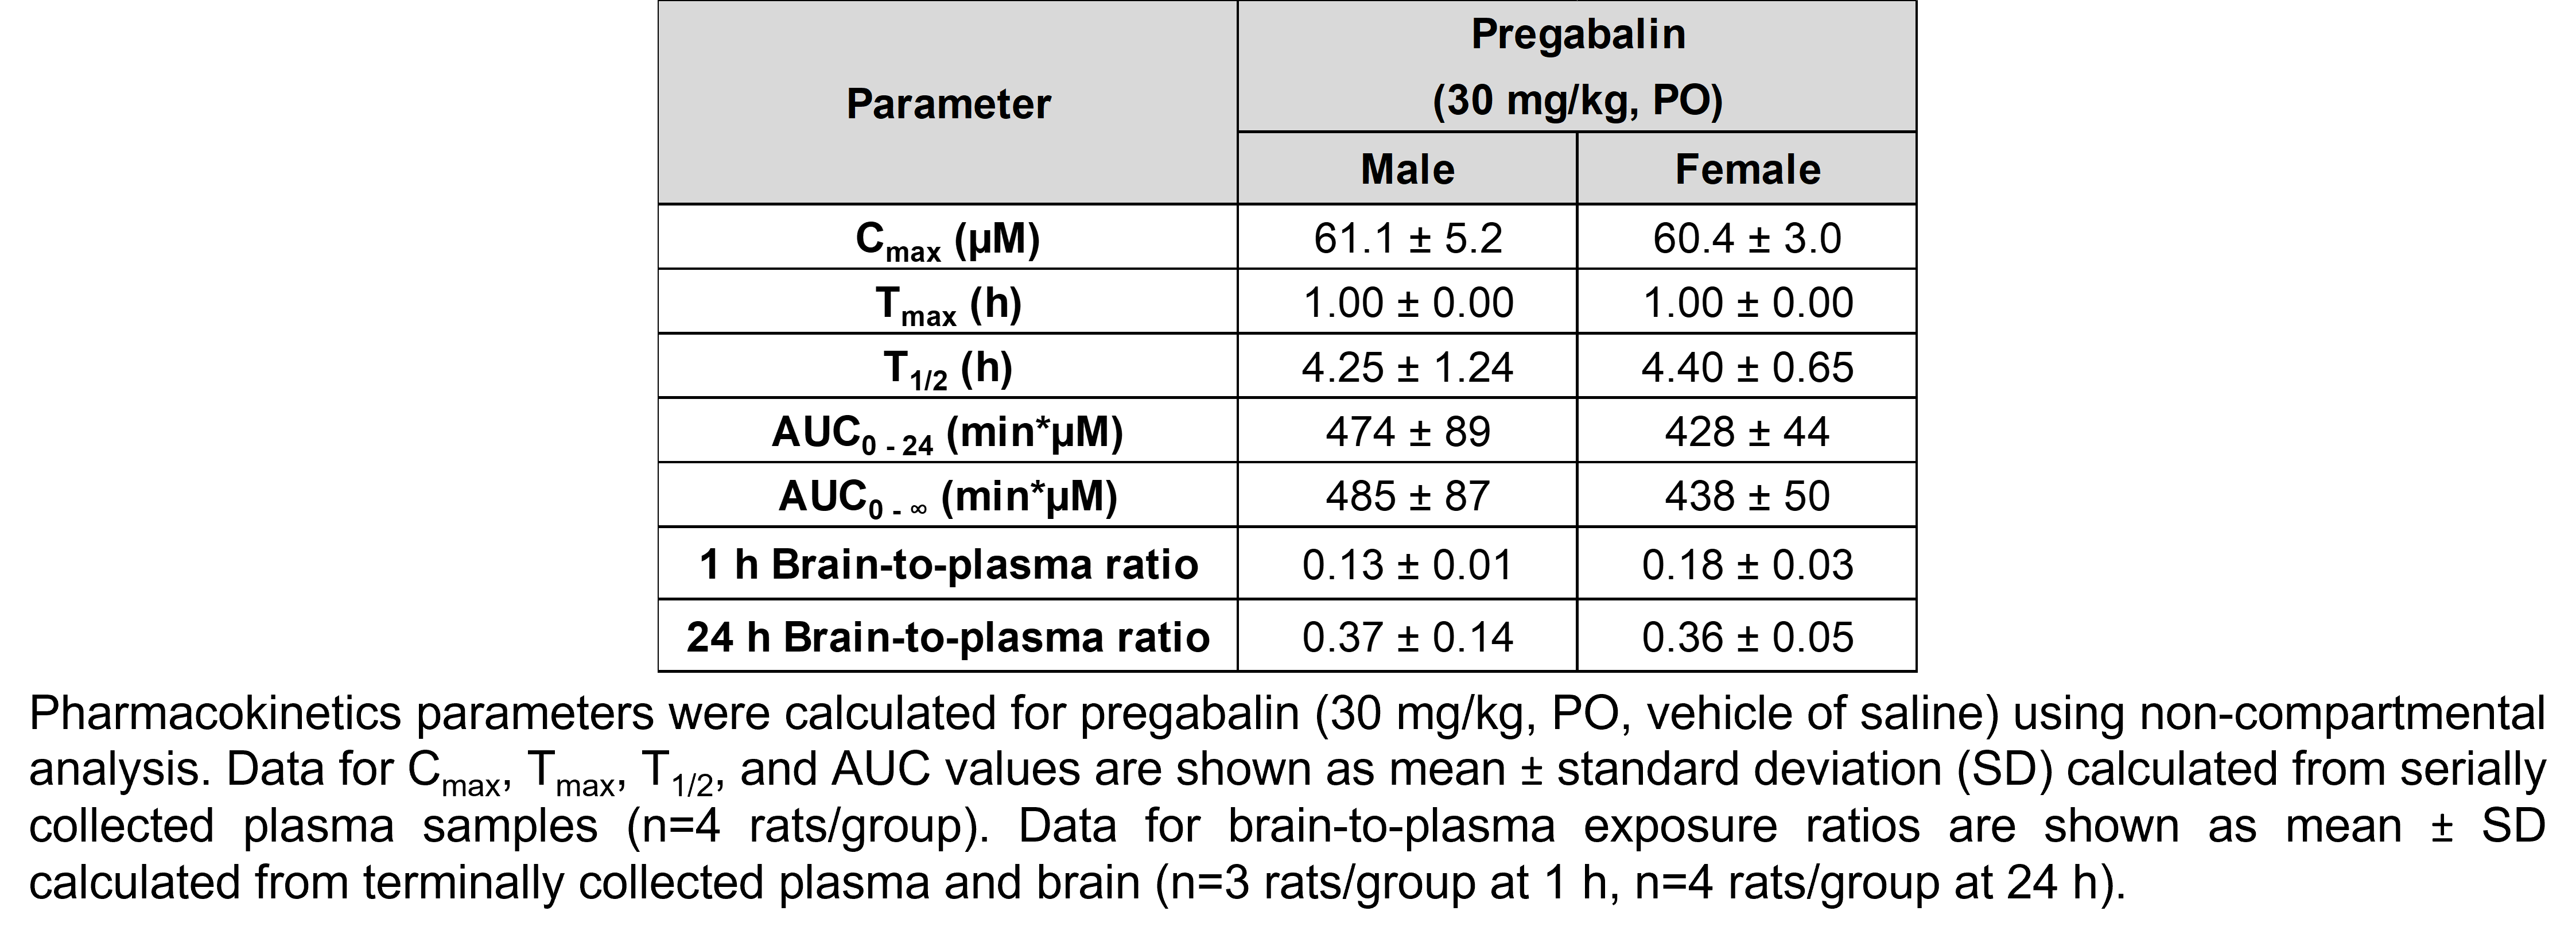 A table shows pharmacokinetics parameters calculated for pregabalin using non-compartmental analysis in male and female rats treated with pregabalin (30 mg/kg, PO, vehicle of saline). The means for the 2 groups (males and females treated with 30 mg/kg pregabalin, respectively) are as follows. The highest concentration (Cmax) was 61.1 and 60.4 µM; the time at the maximum concentration (Tmax) was 1 hour for each group; the half-life (T1/2) was 4.25 and 4.4 hours; area under the curve for time 0 to 24 hours was 474 and 428 minutes*µM; area under the curve for time 0 to infinity was 485 and 438 minutes*µM; the brain-to-plasma ratio at 1 hour was 0.13 and 0.18; the brain-to-plasma ratio at 24 hours was 0.37 and 0.36.